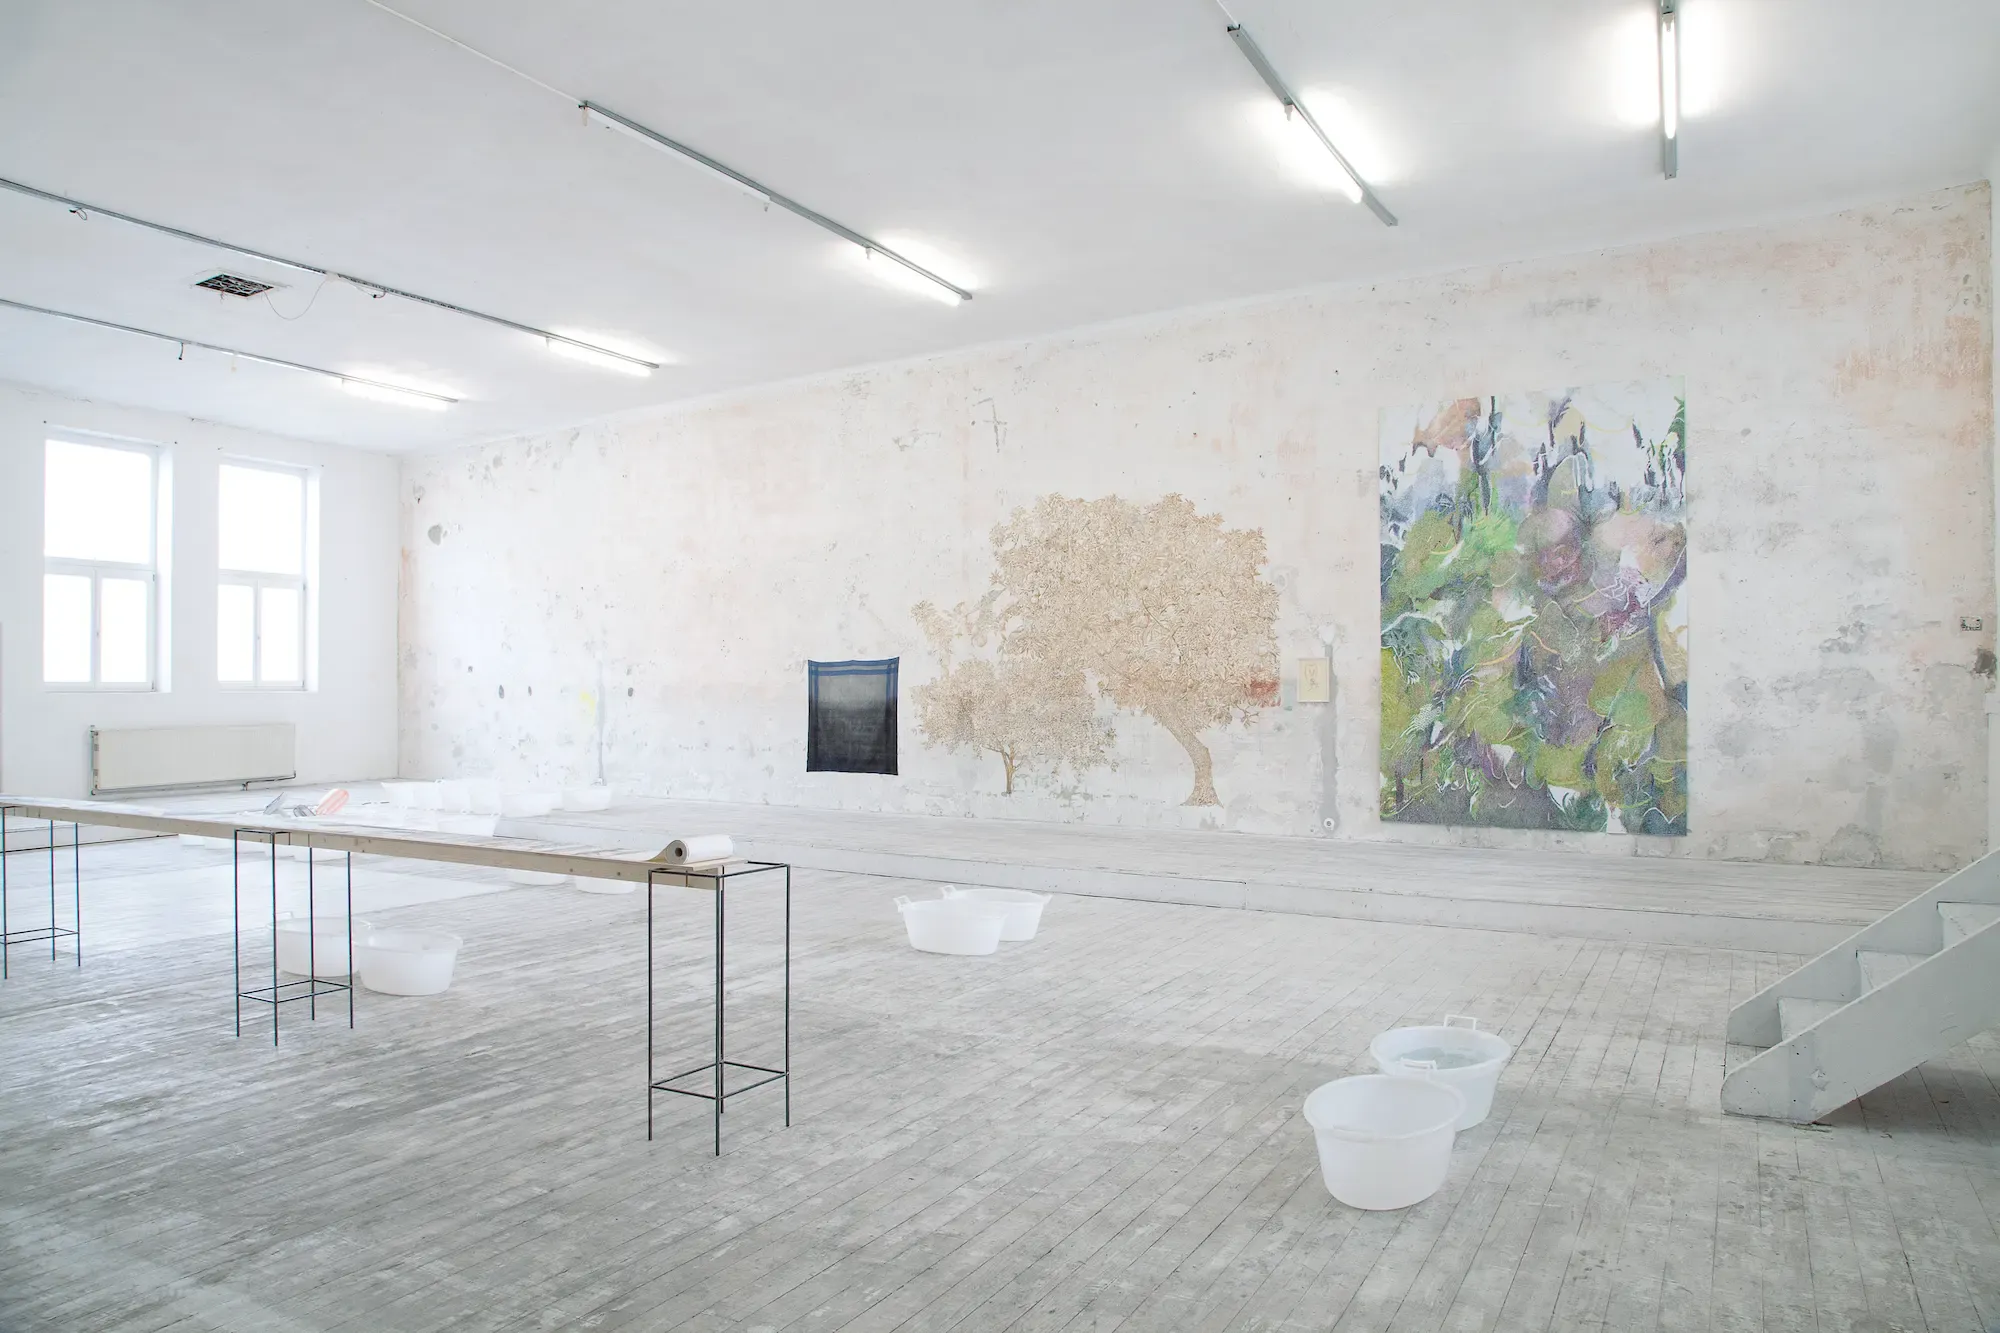 kunstverein schattendorf Installation view from the current exhibition hereafter curated by siggi hofer 